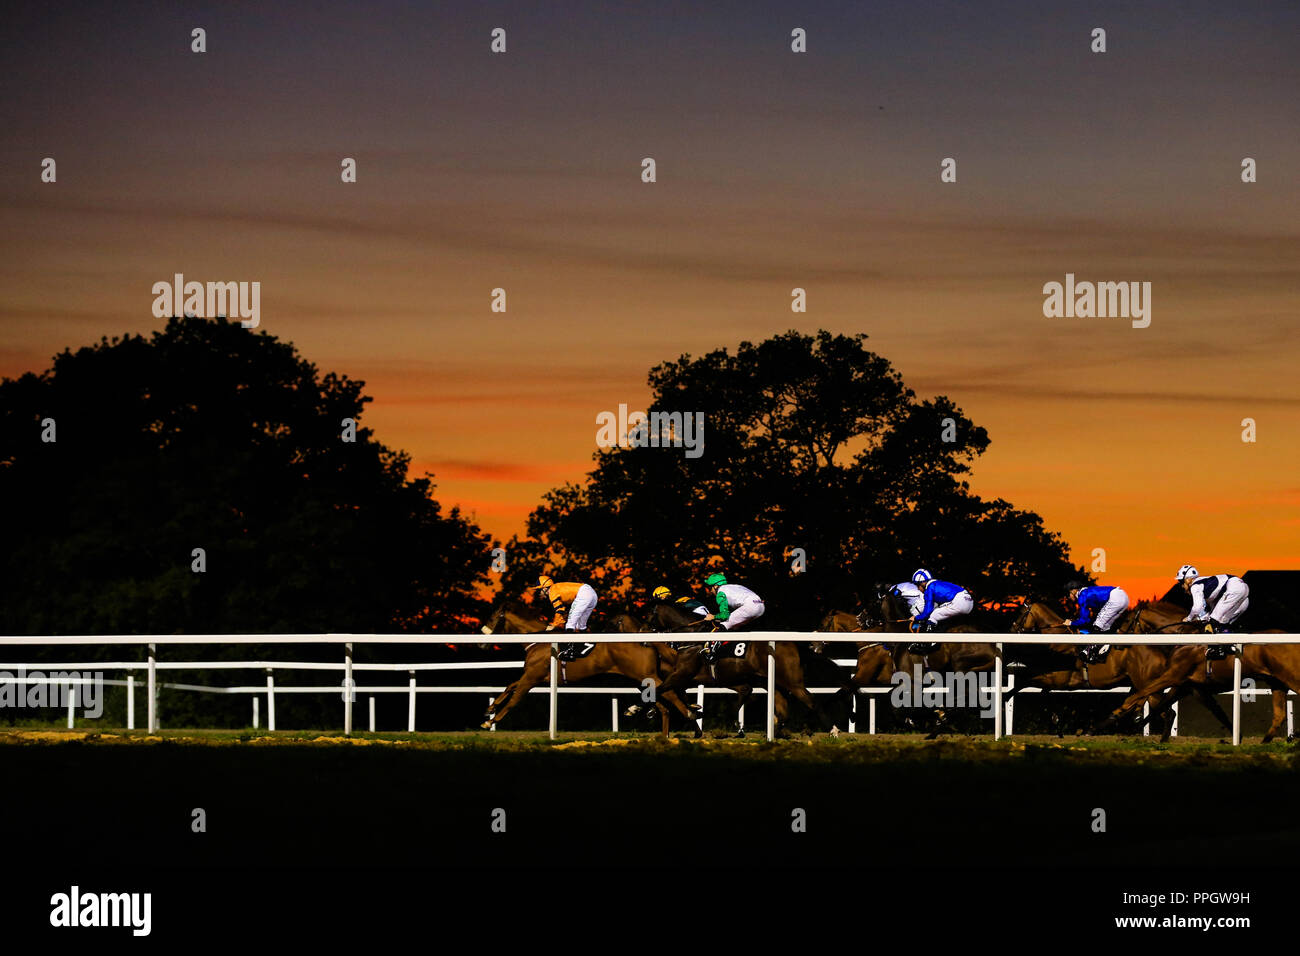 Chelmsford, UK. 25th September, 2018. Chelmsford City Racing, 19.15 Chelmsford City Irish Lotto At totesport.com Handicap ; The field race against the sunset at Chelmsford.   Credit: Georgie Kerr/News Images Credit: News Images /Alamy Live News Stock Photo